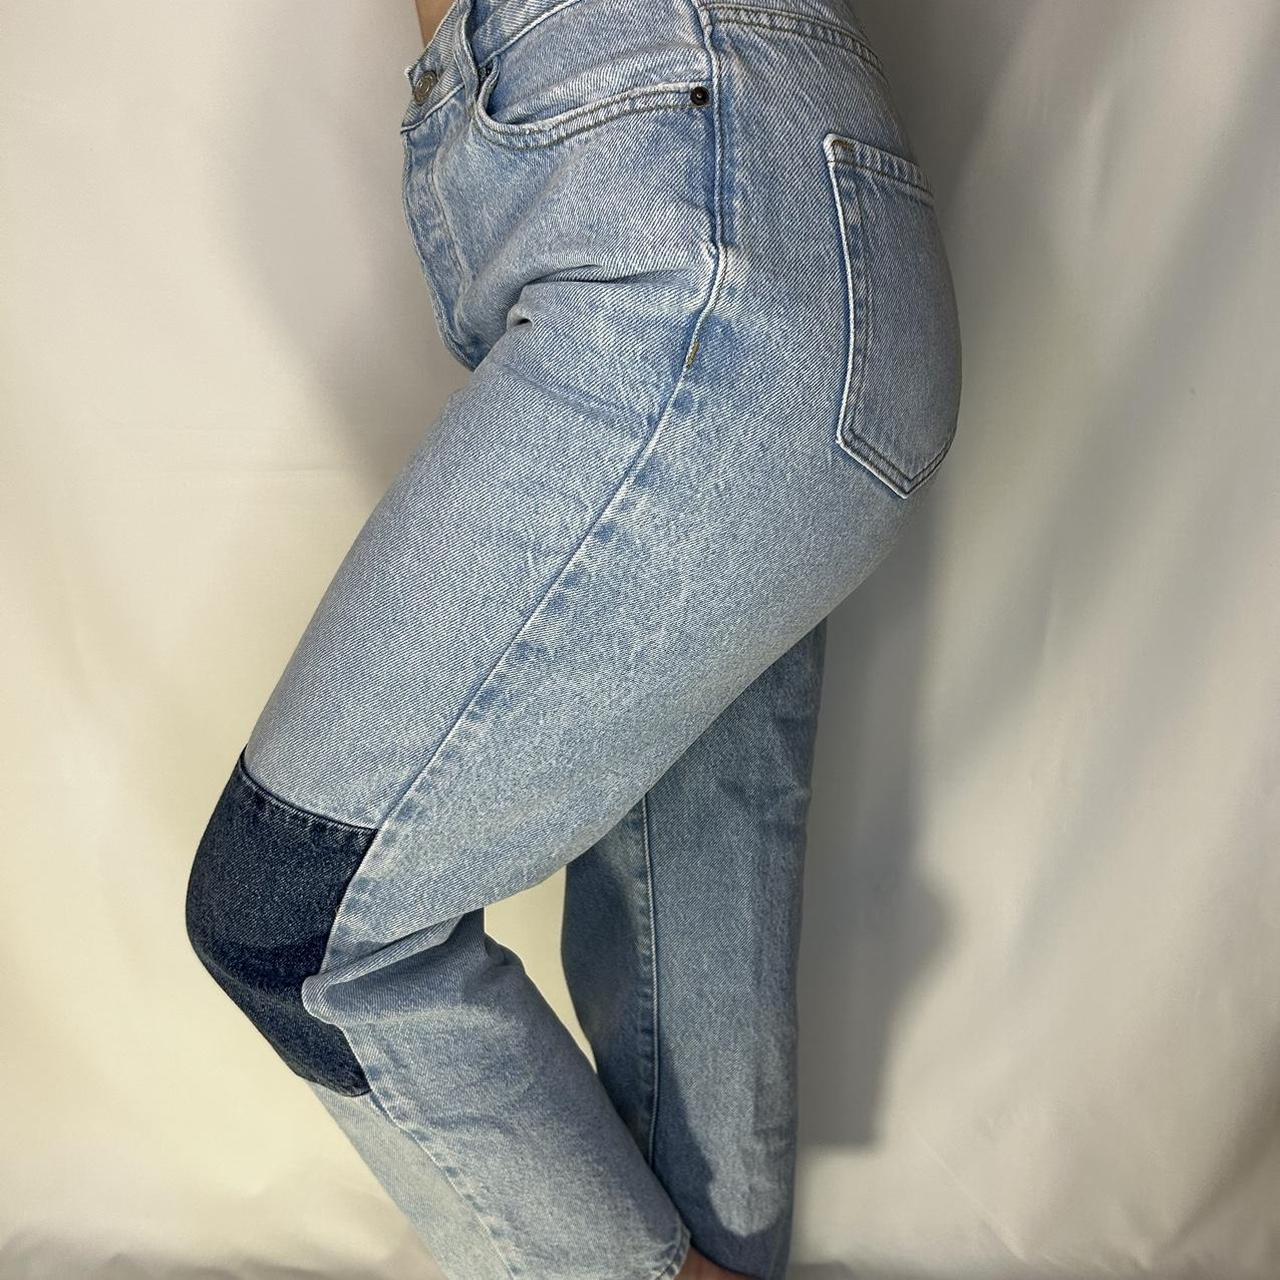 PACSUN MOM JEANS 👖 • HIGH WAISTED LIGHT WASH JEANS - Depop